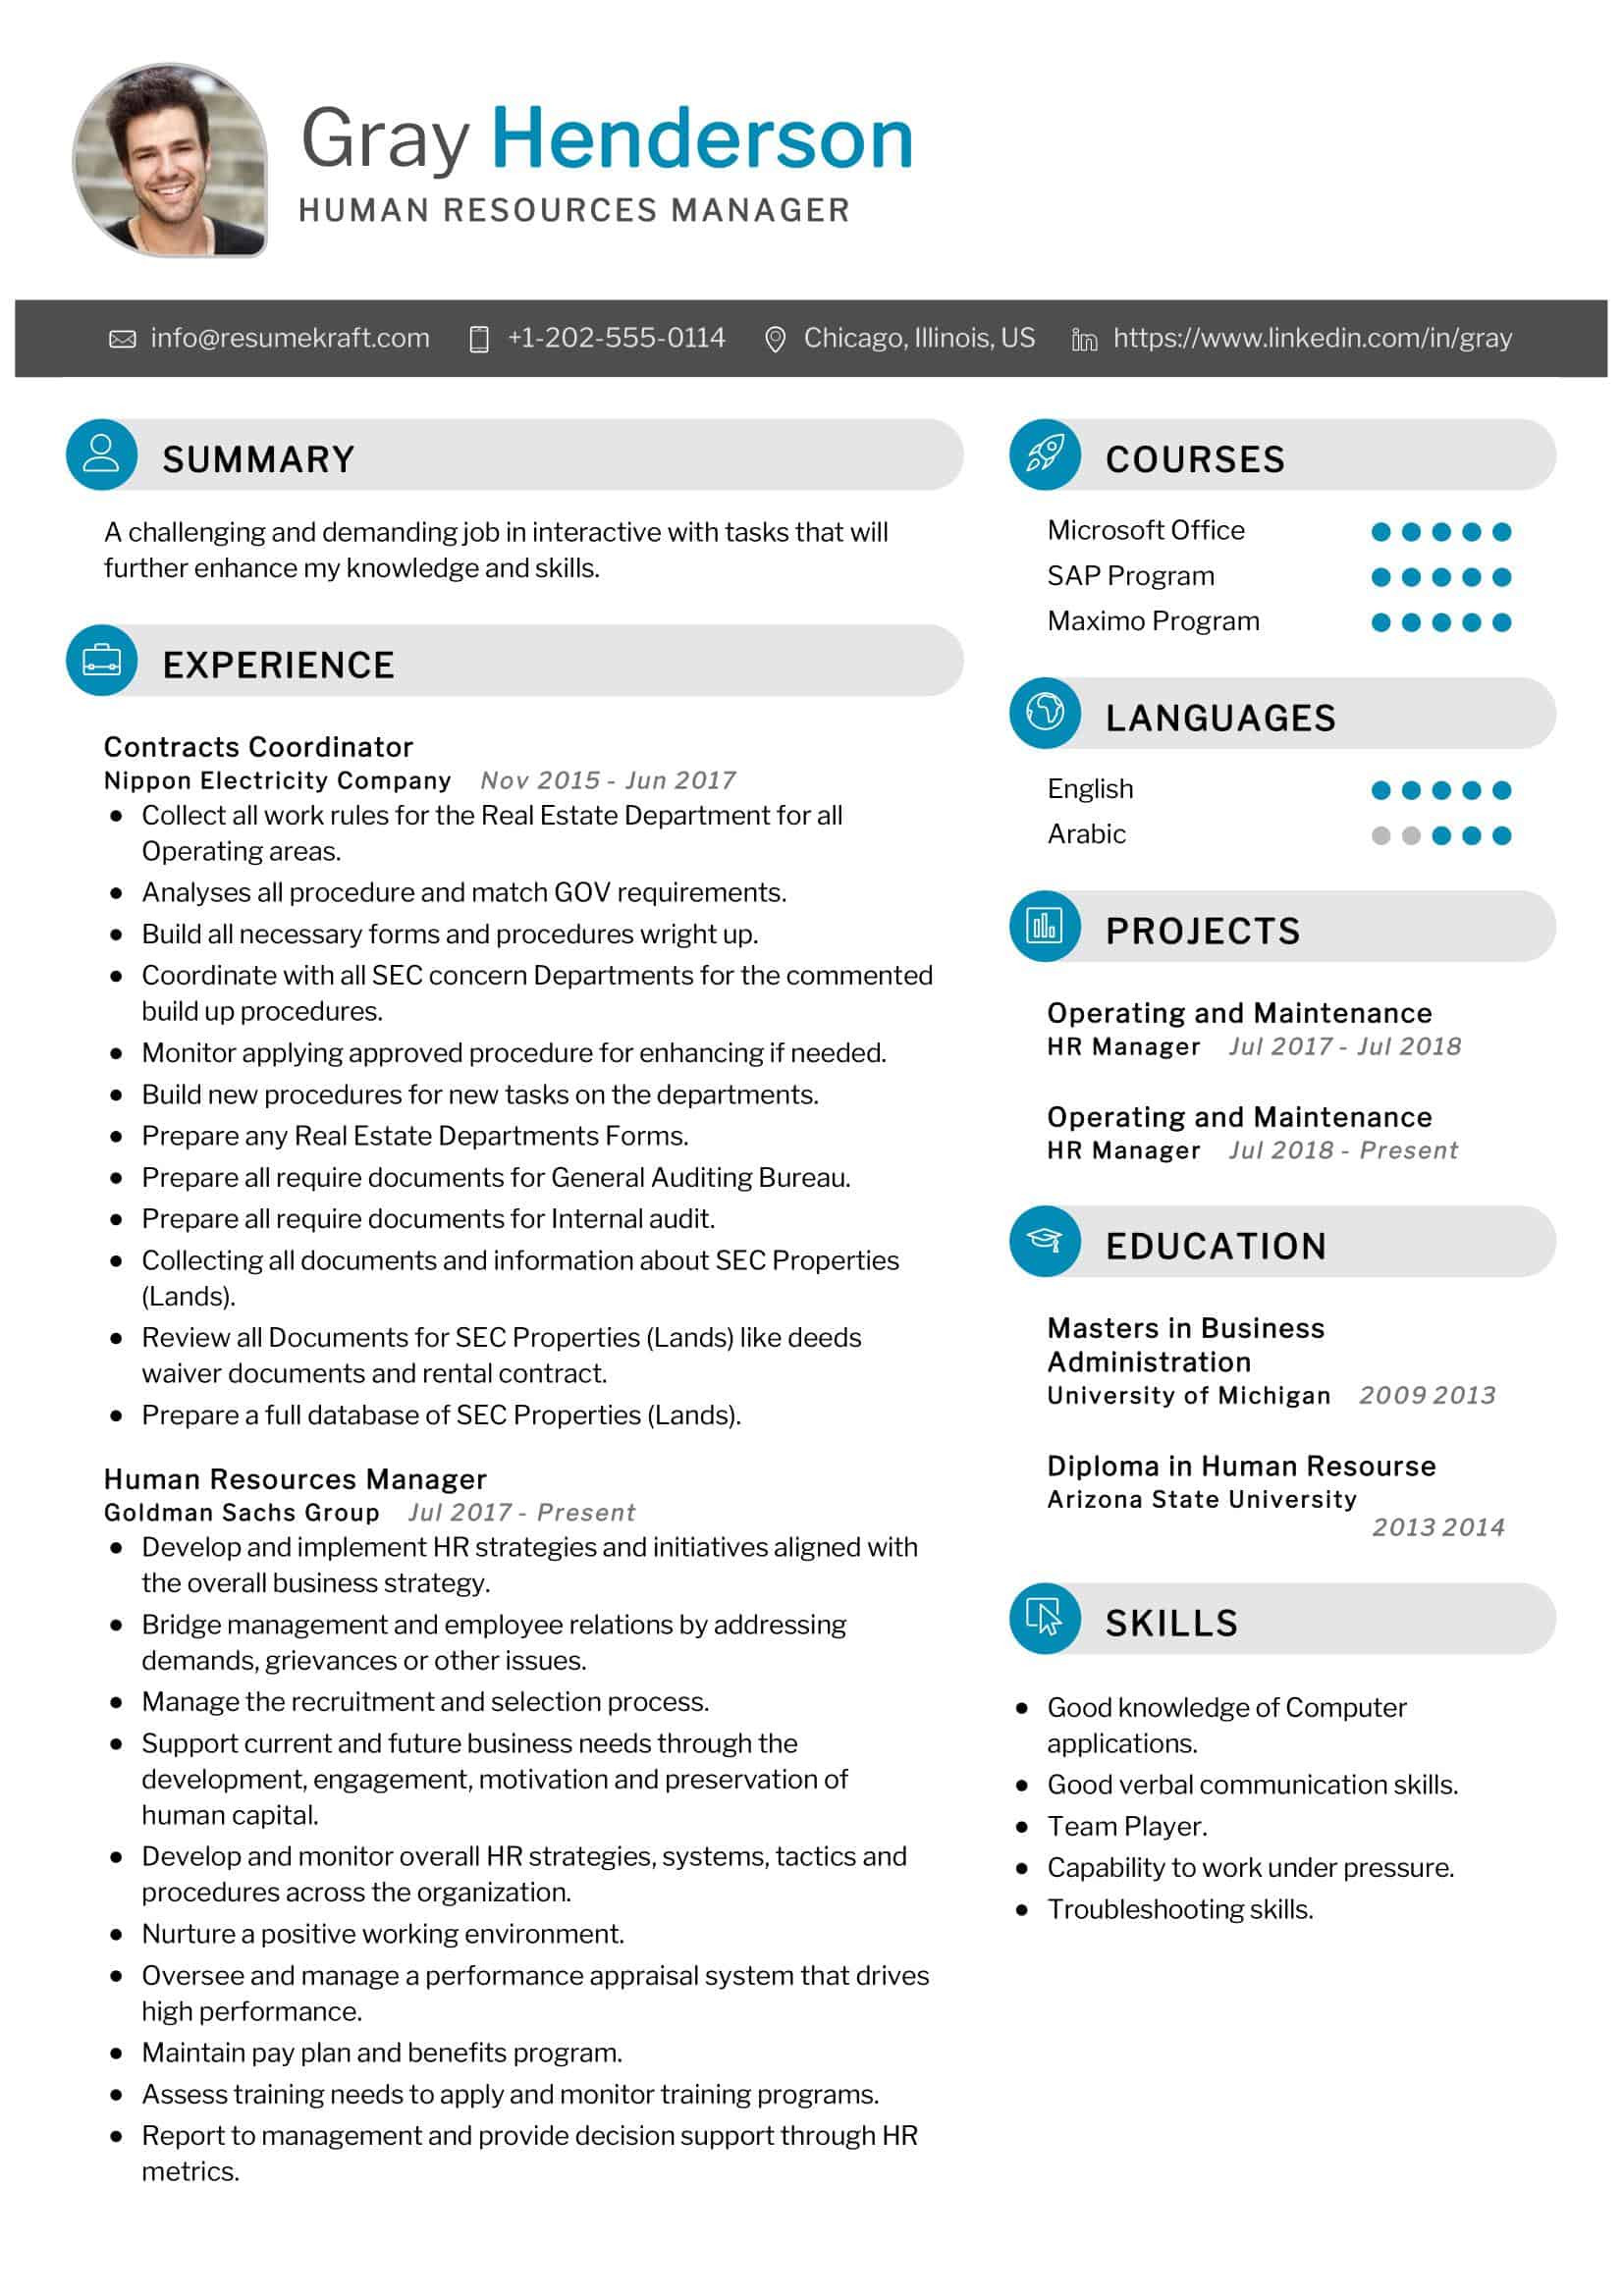 Free Sample Resume for Human Resource Manager Human Resources Manager Resume 2022 Writing Tips – Resumekraft